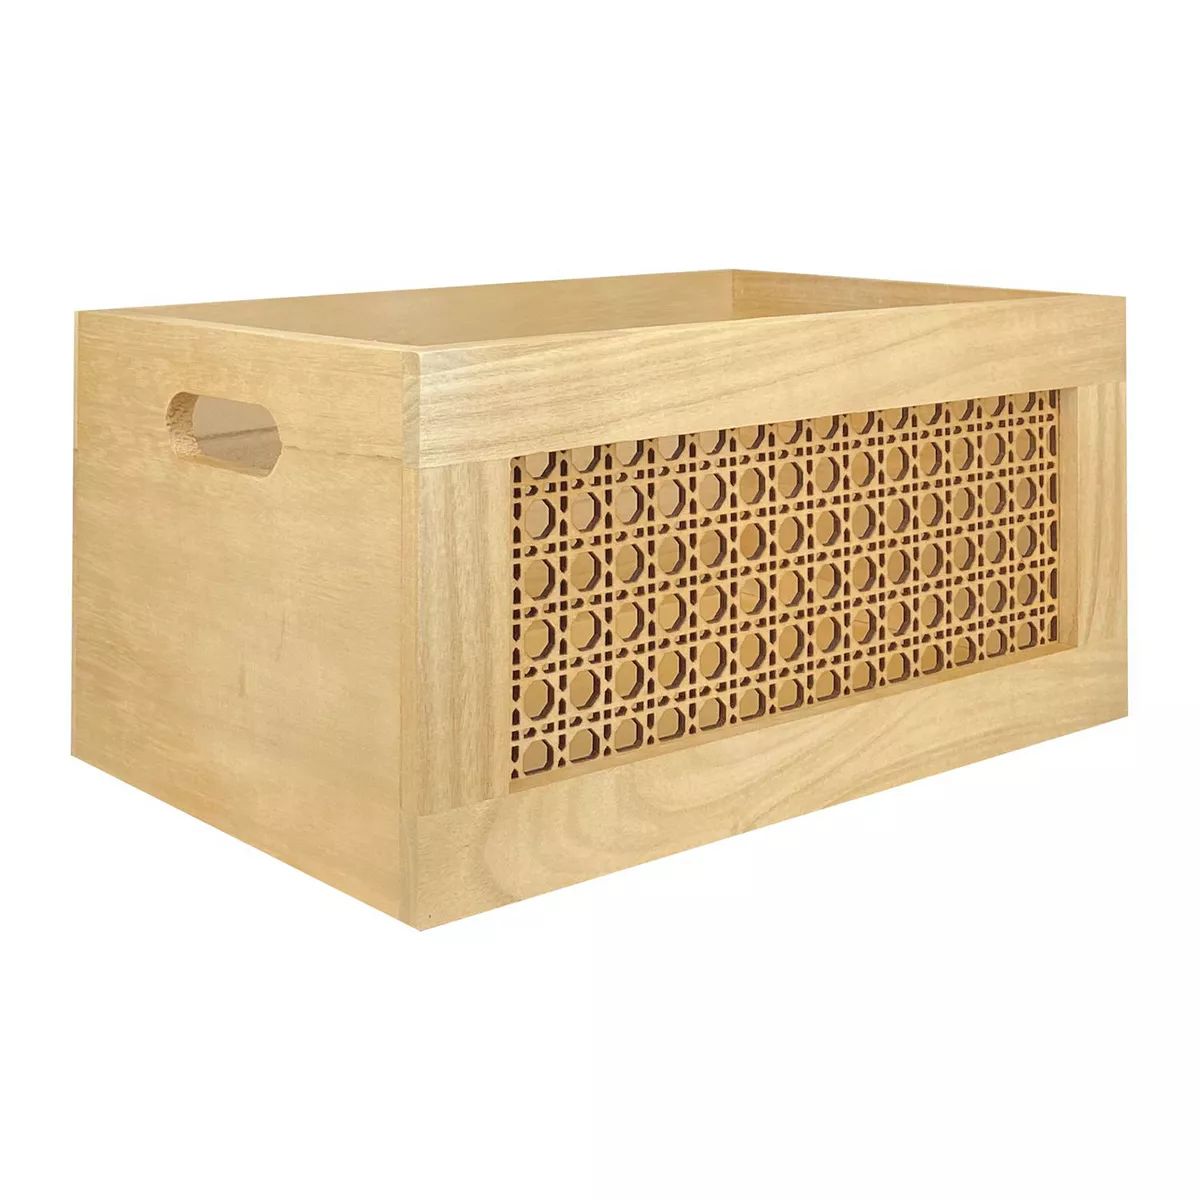 Belle Maison Wooden Bin With Caning Panel | Kohl's